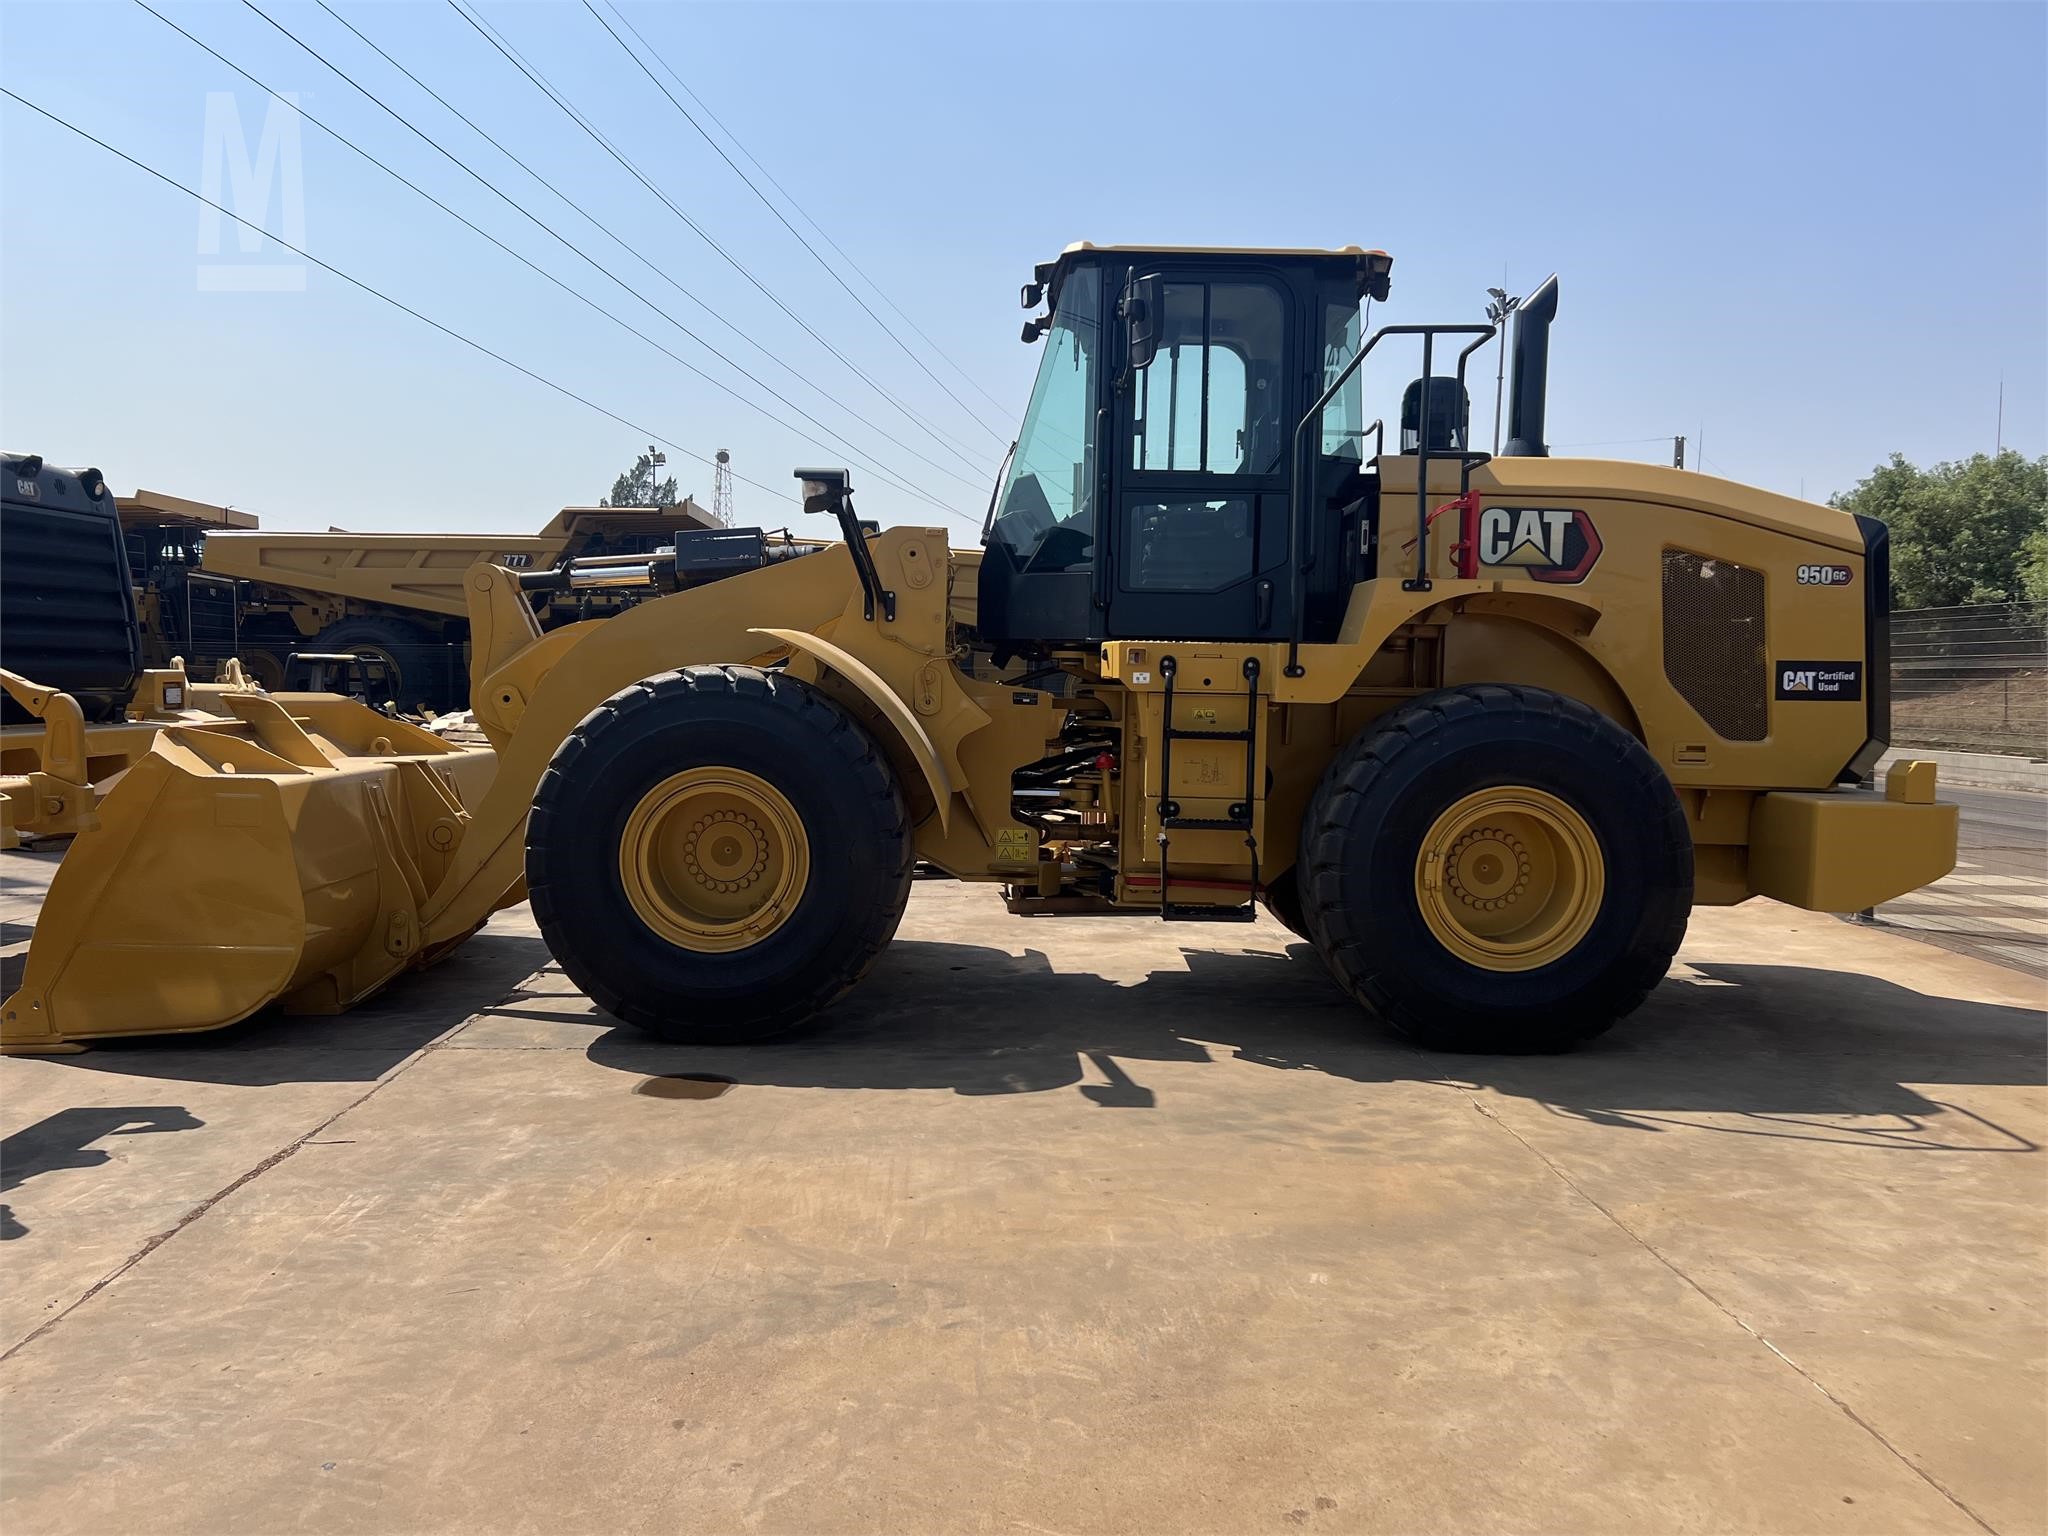 CATERPILLAR 950 For Sale - 492 Listings